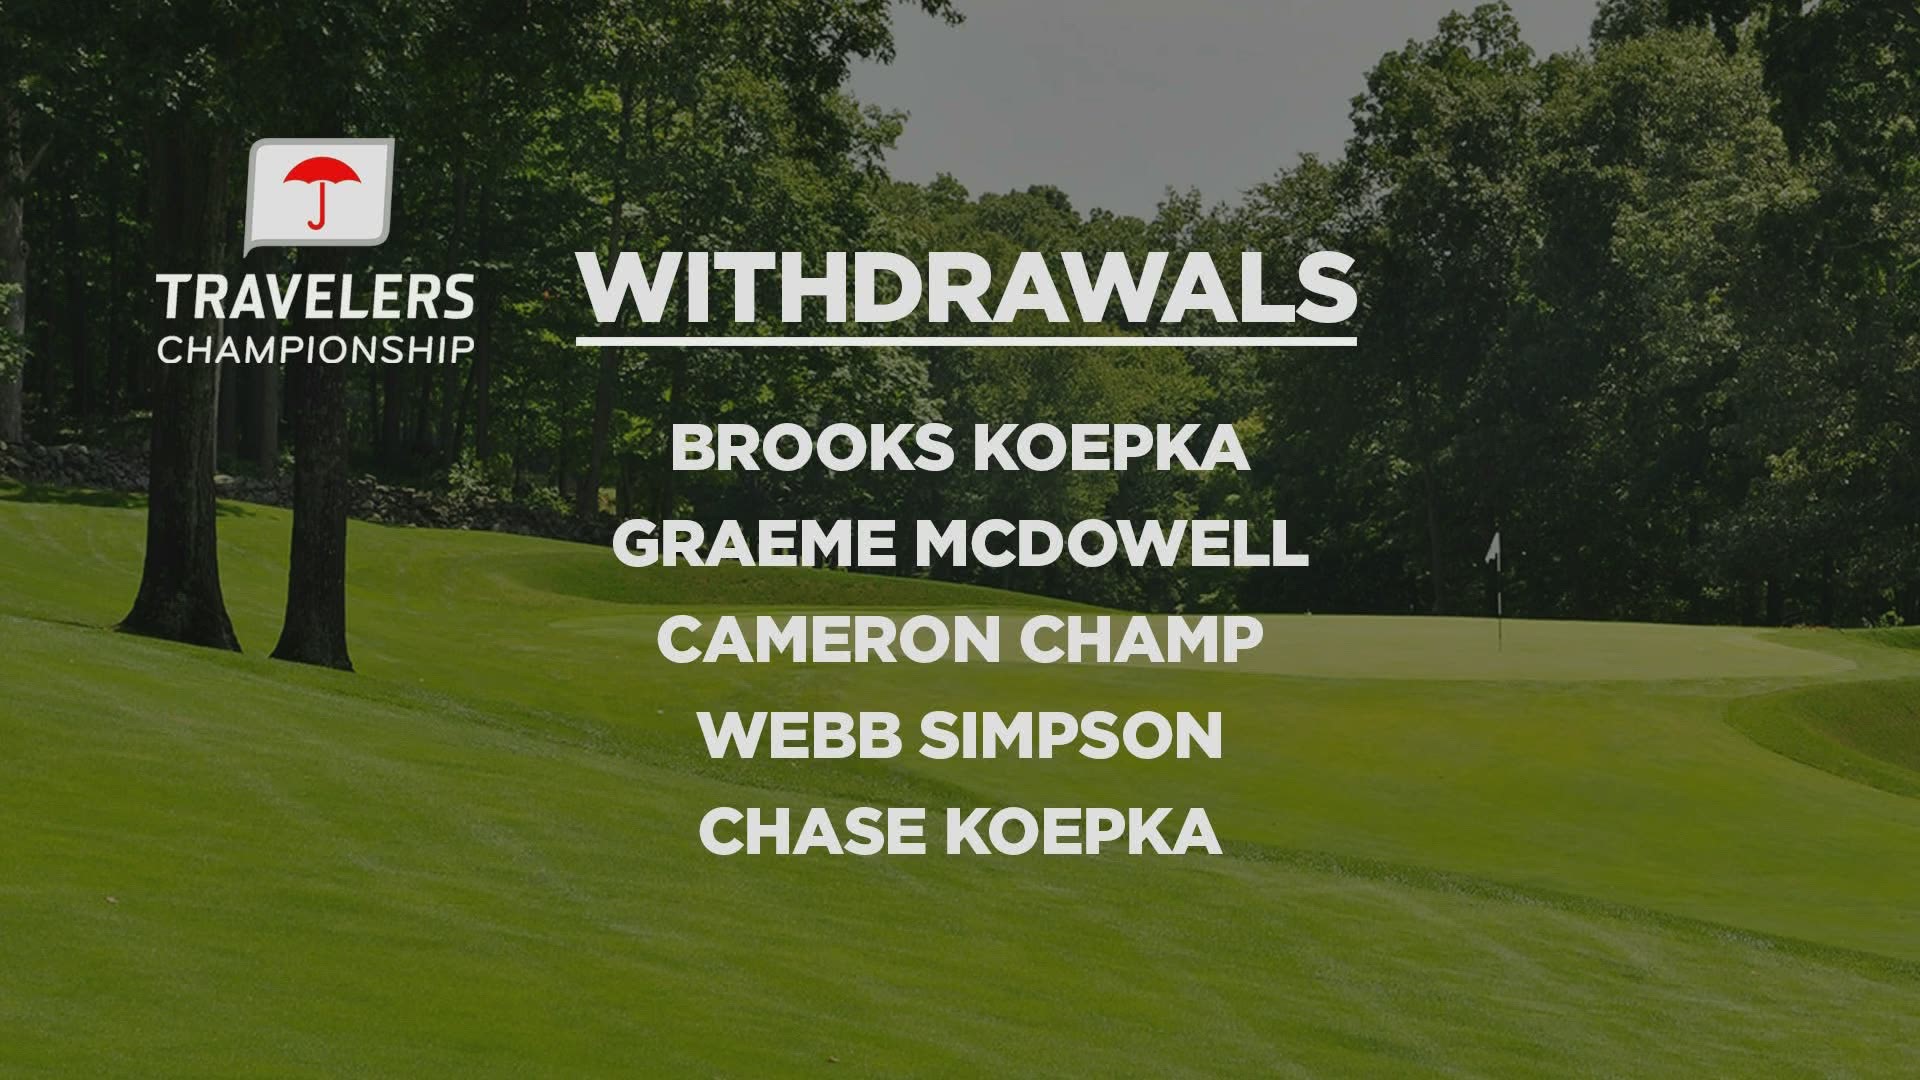 5 players have withdrawn